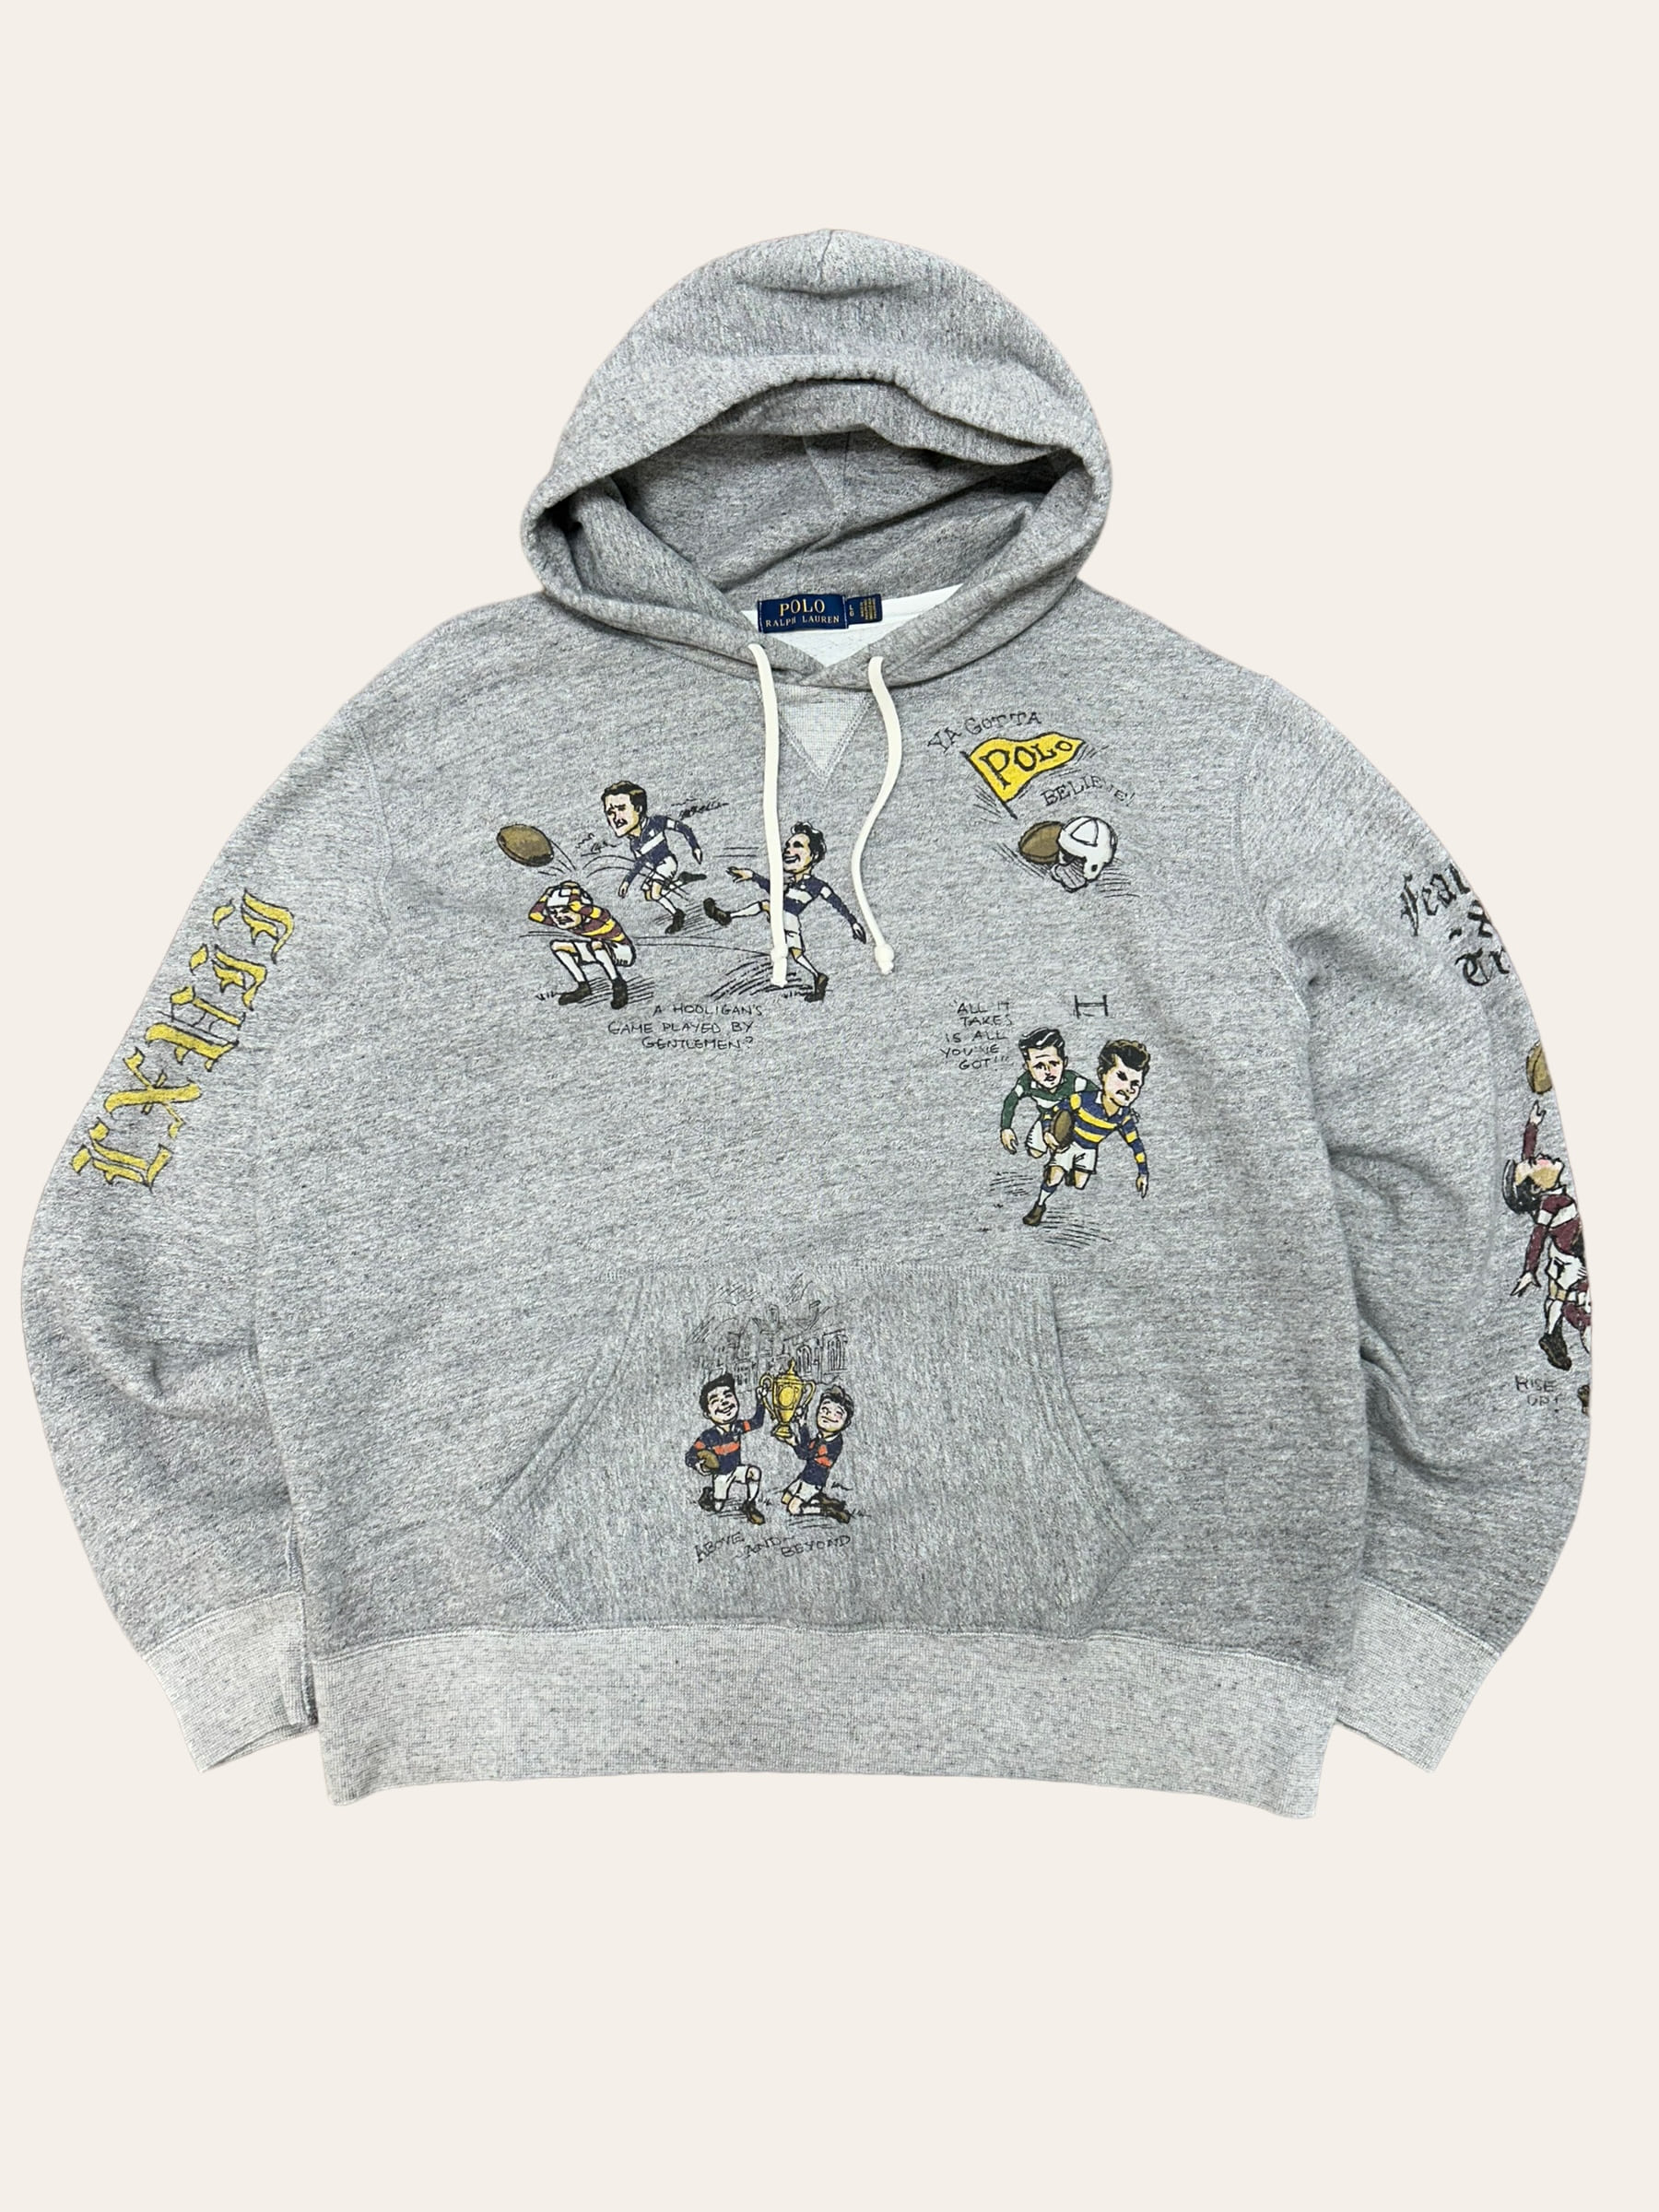 Polo ralph lauren gray rugby printing hoody L